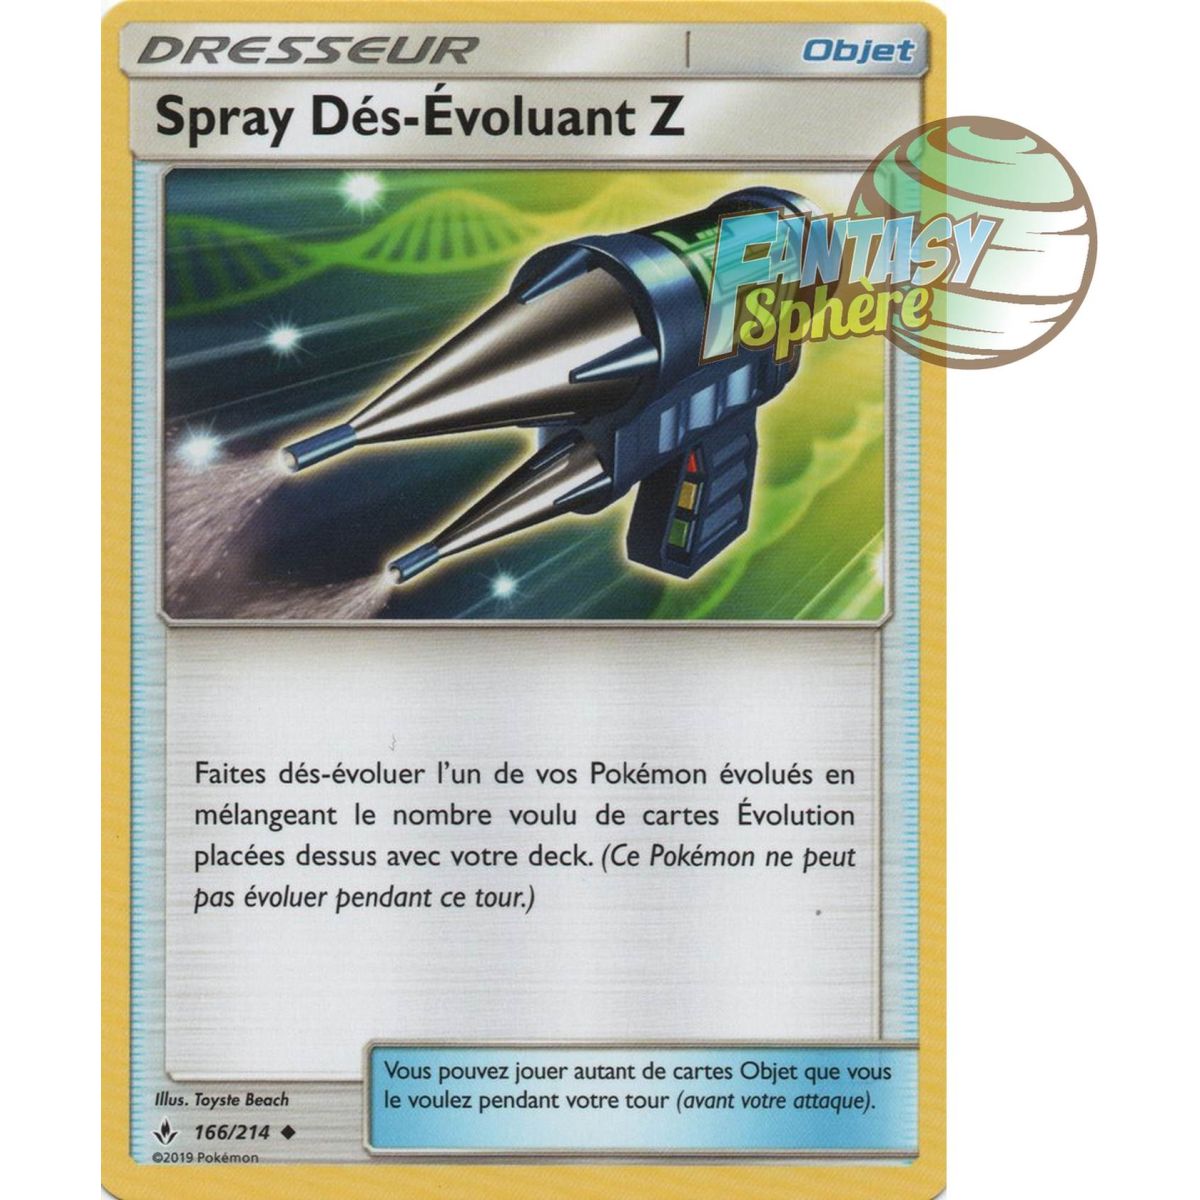 Item Des-Evolving Spray Z - Uncommon 166/214 - Sun and Moon 10 Infallible Alliance